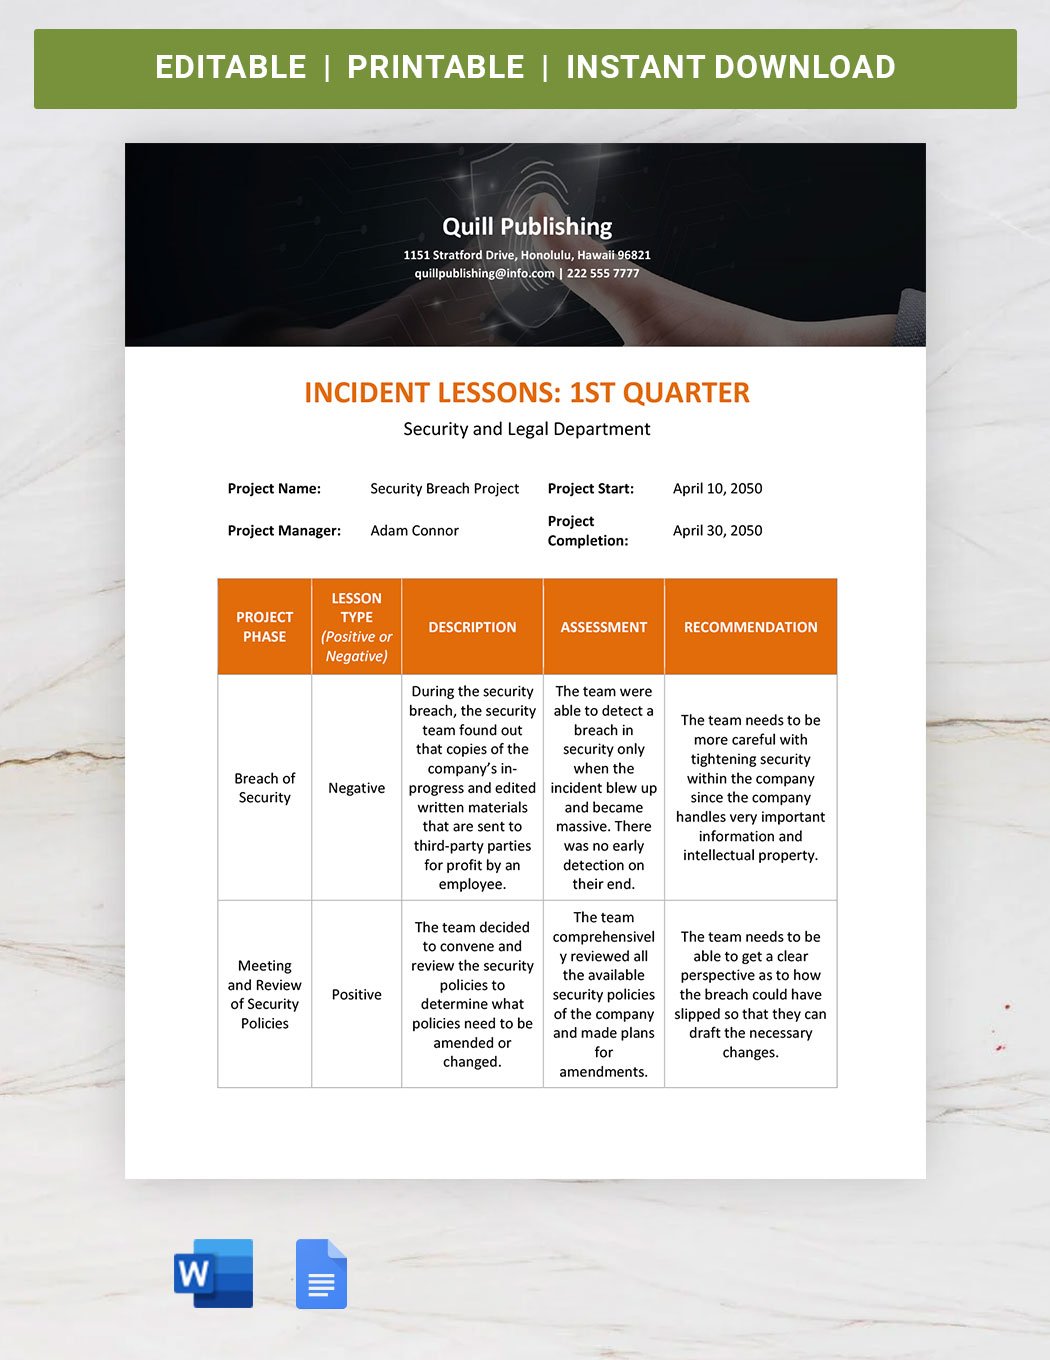 Incident Lessons Learned Template in Word, Google Docs